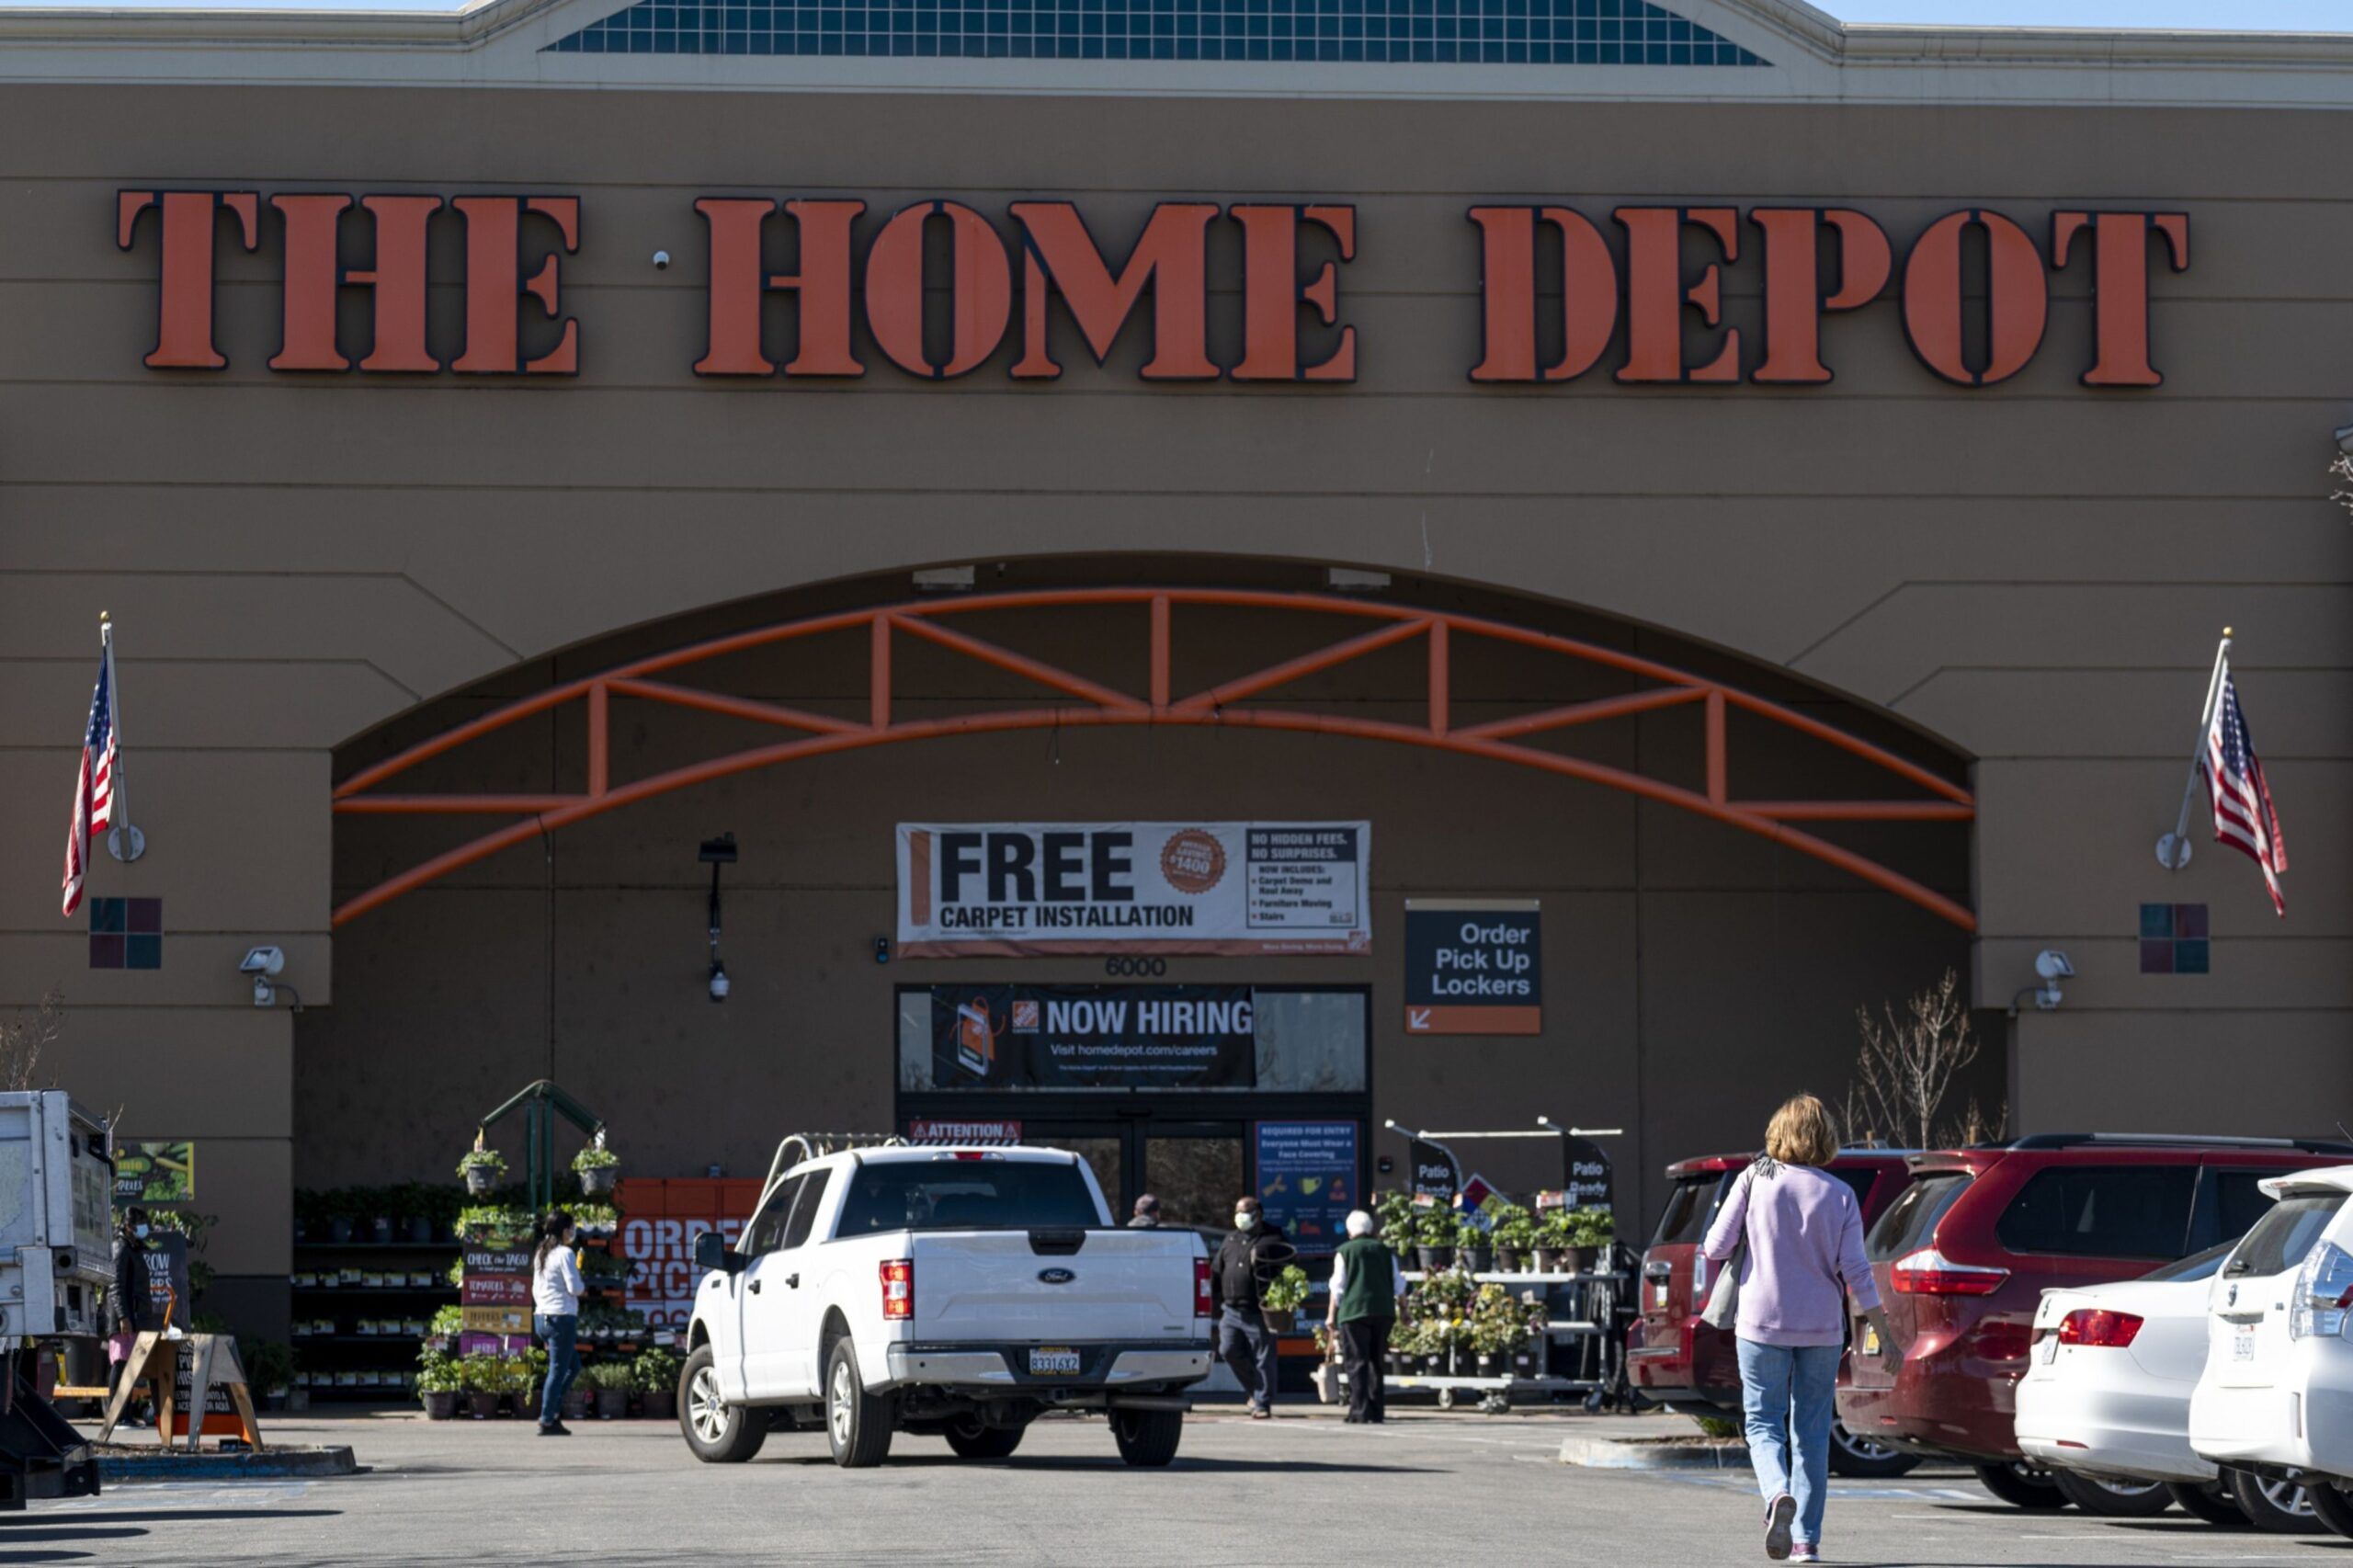 Shoppers enter a Home Depot store in Pleasanton, California, U.S., on Monday, Feb. 22, 2021. Home Depot Inc. is expected to release earnings figures on February 23. Photographer: David Paul Morris/Bloomberg